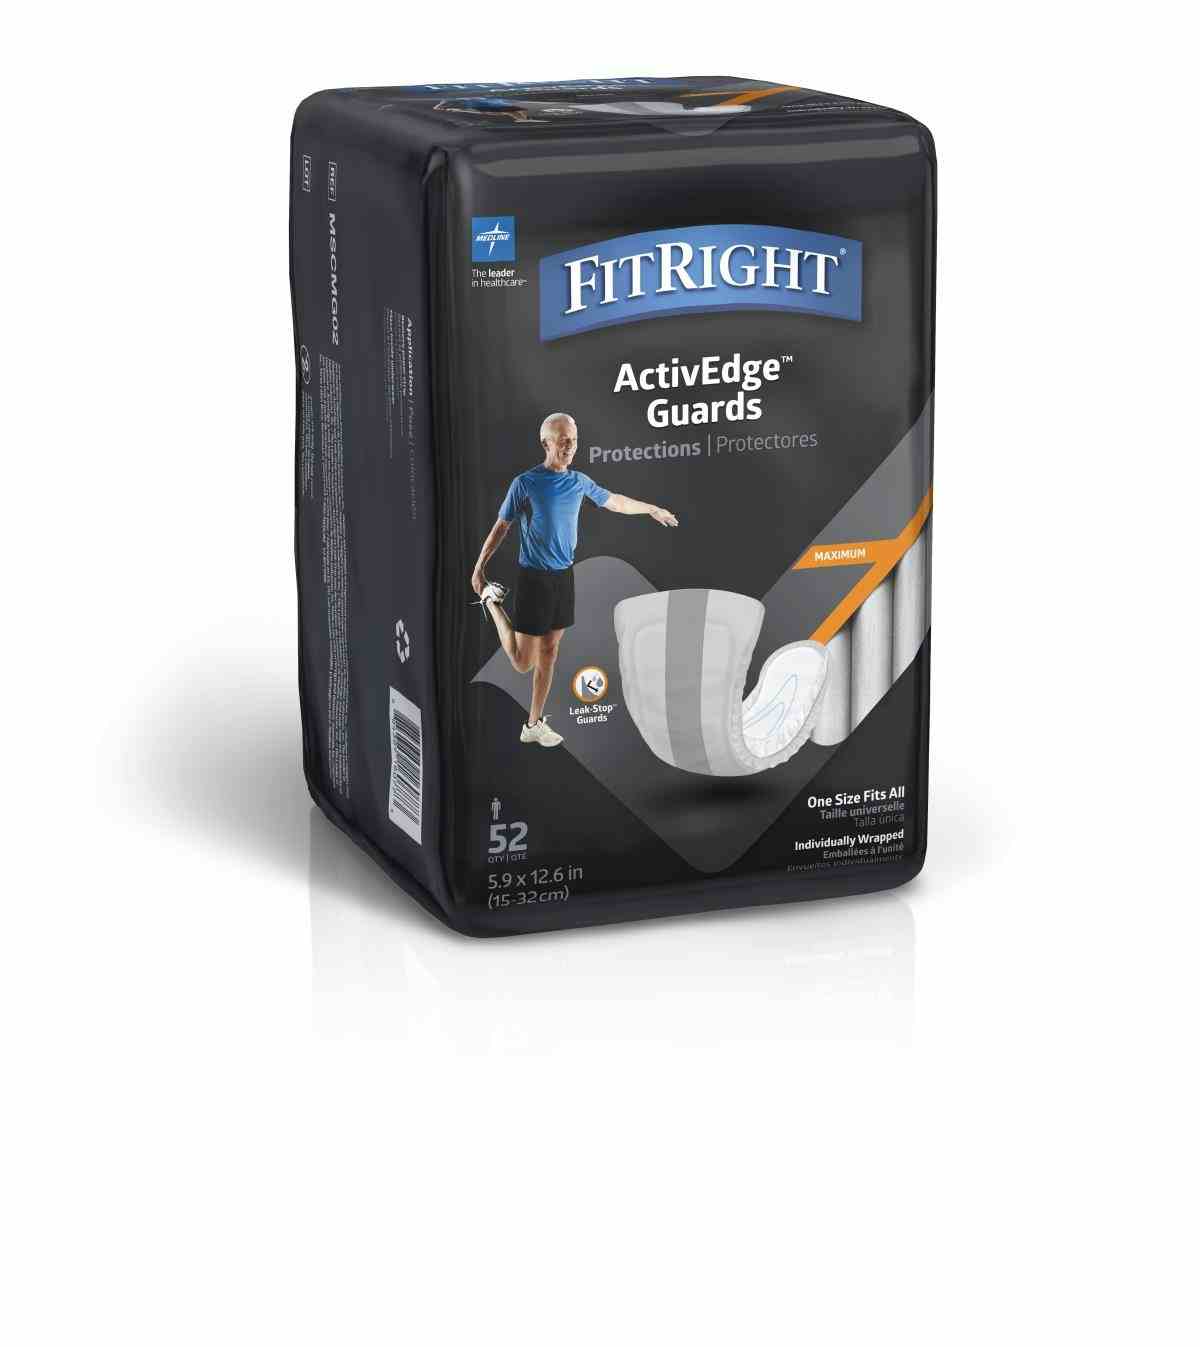 FitRight ActiveEdge Guards Incontinence Liners for Men, Level 3, MSCMG02Z, 6 X 11 Inches - Bag of 52